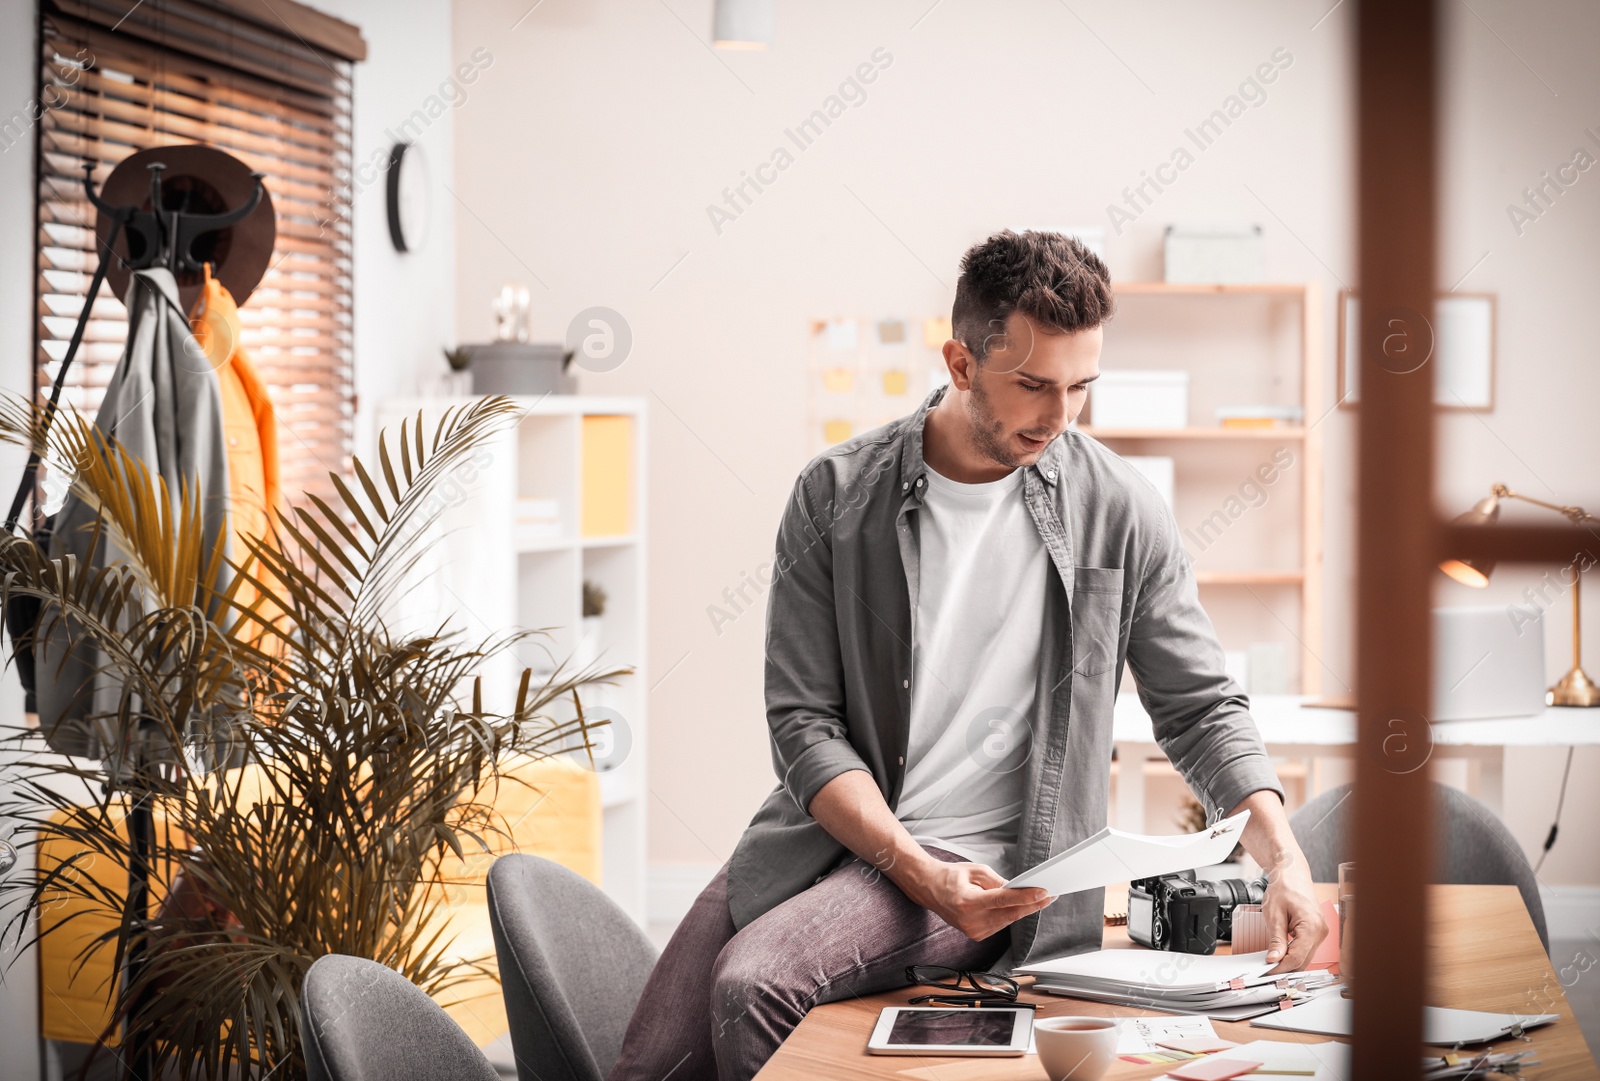 Image of Journalist with papers at workplace in office